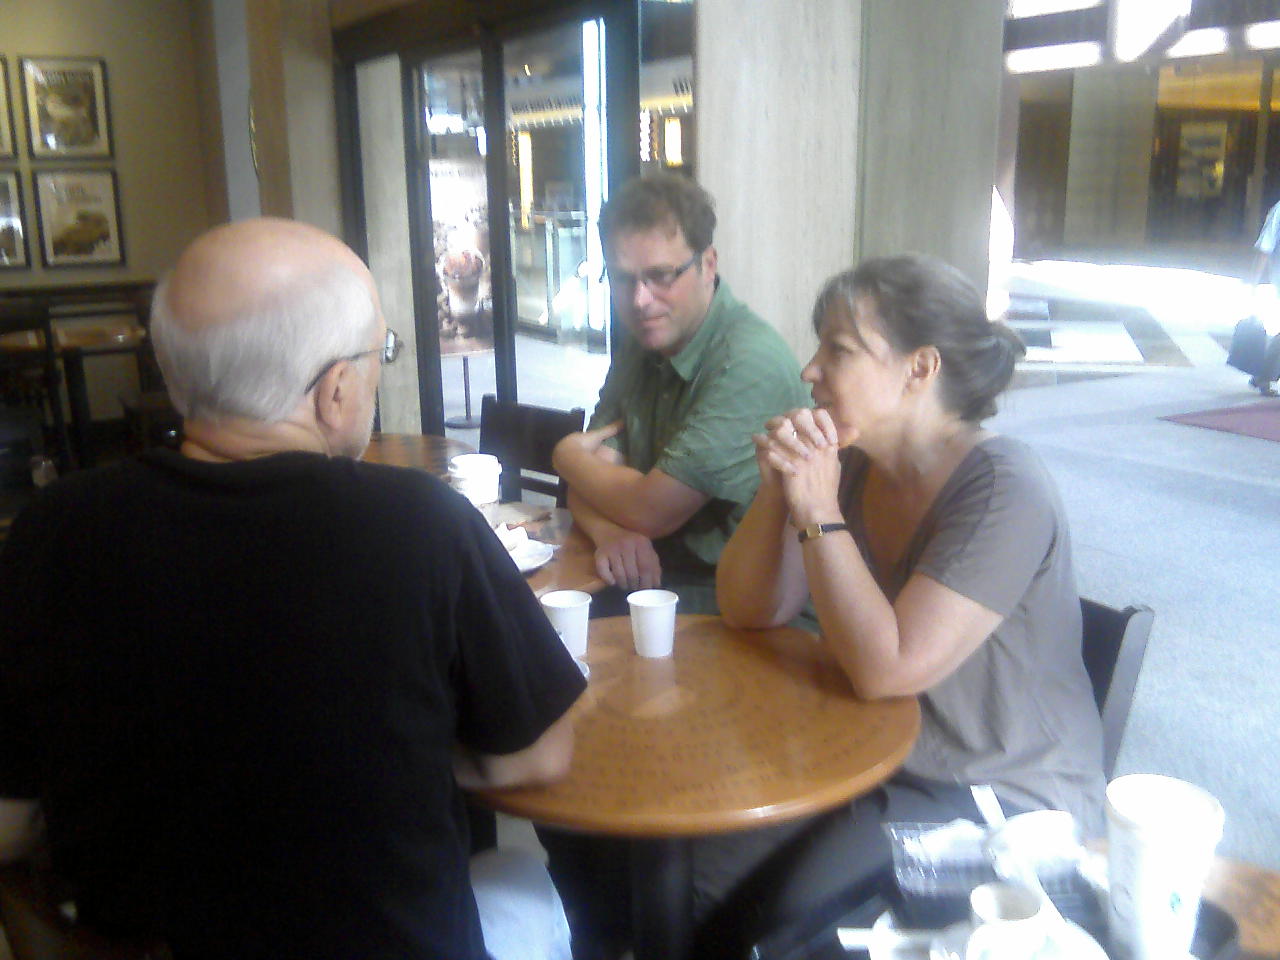 Discussing important NEXUS business at Starbucks office - "where to have lunch?"